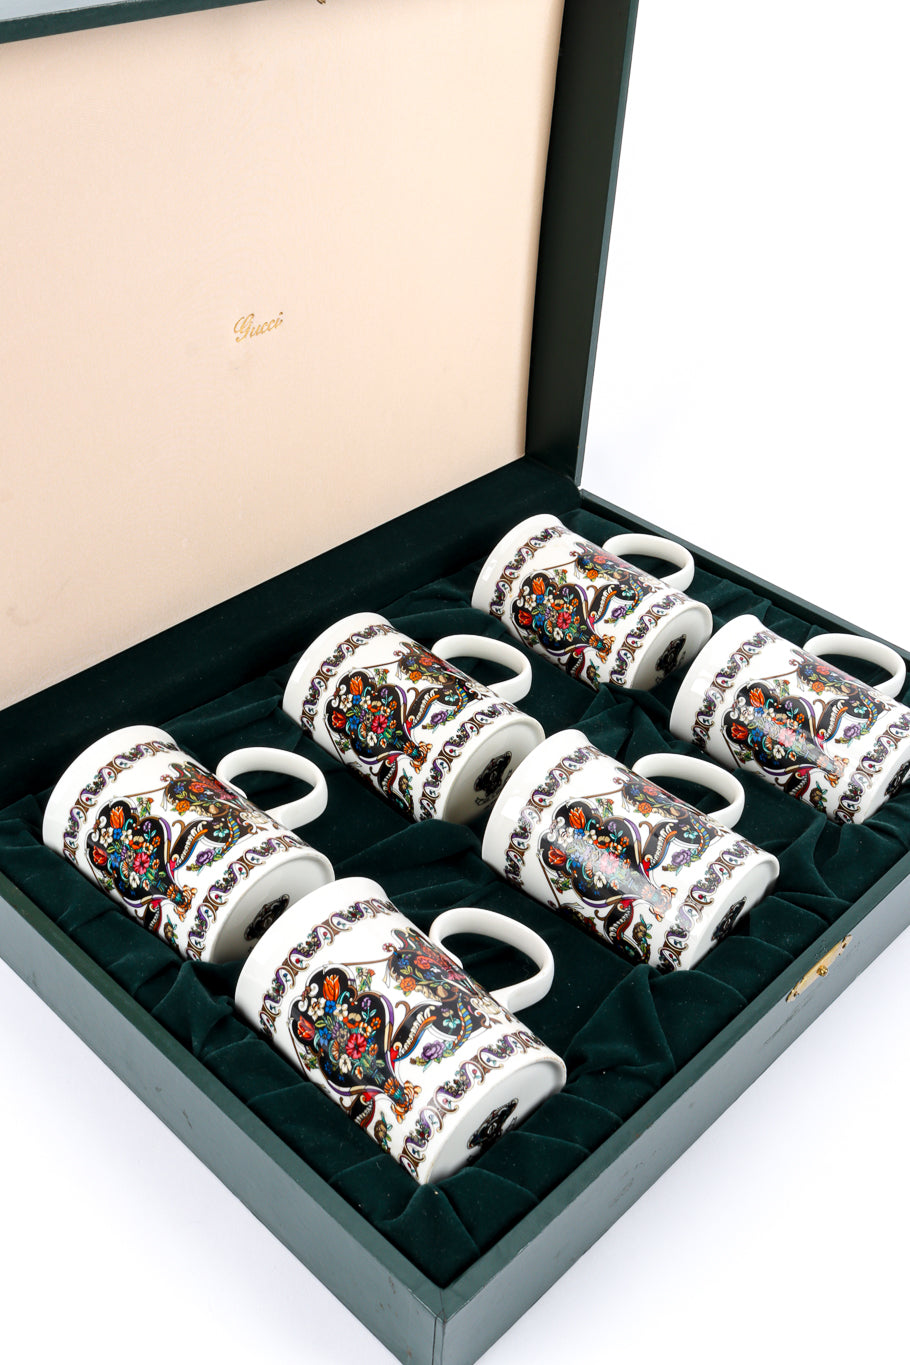 Gilded Floral Signed Mugs Boxed Set by Gucci @recessla